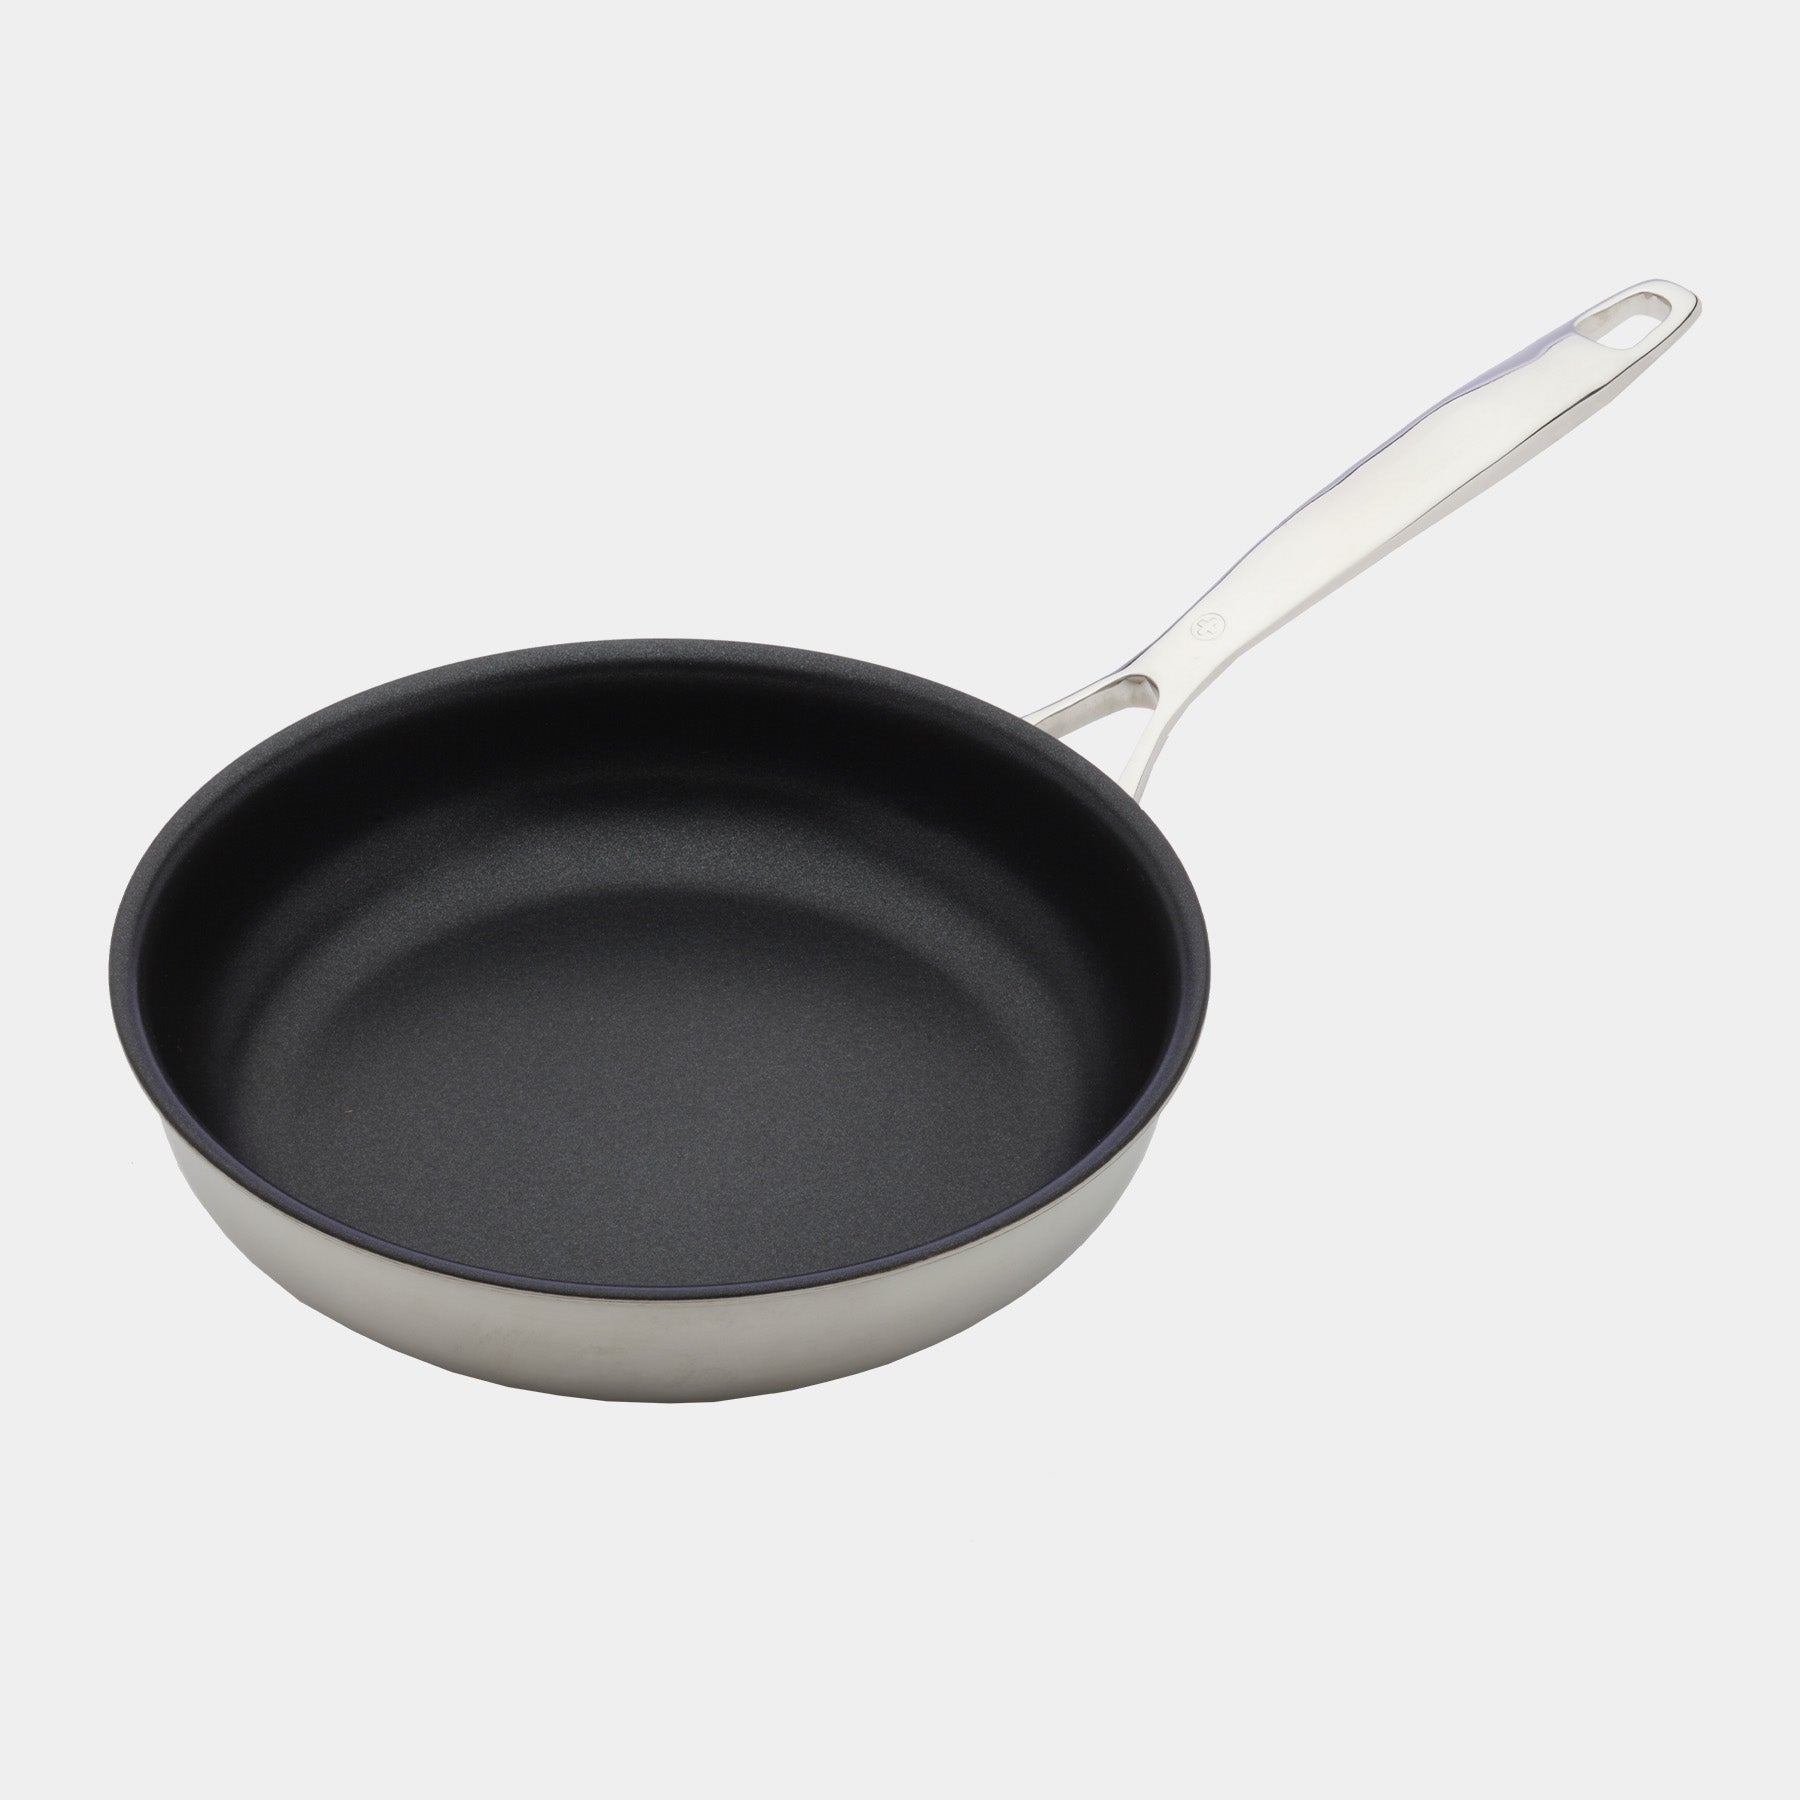 Nonstick Clad 8" Fry Pan - Induction